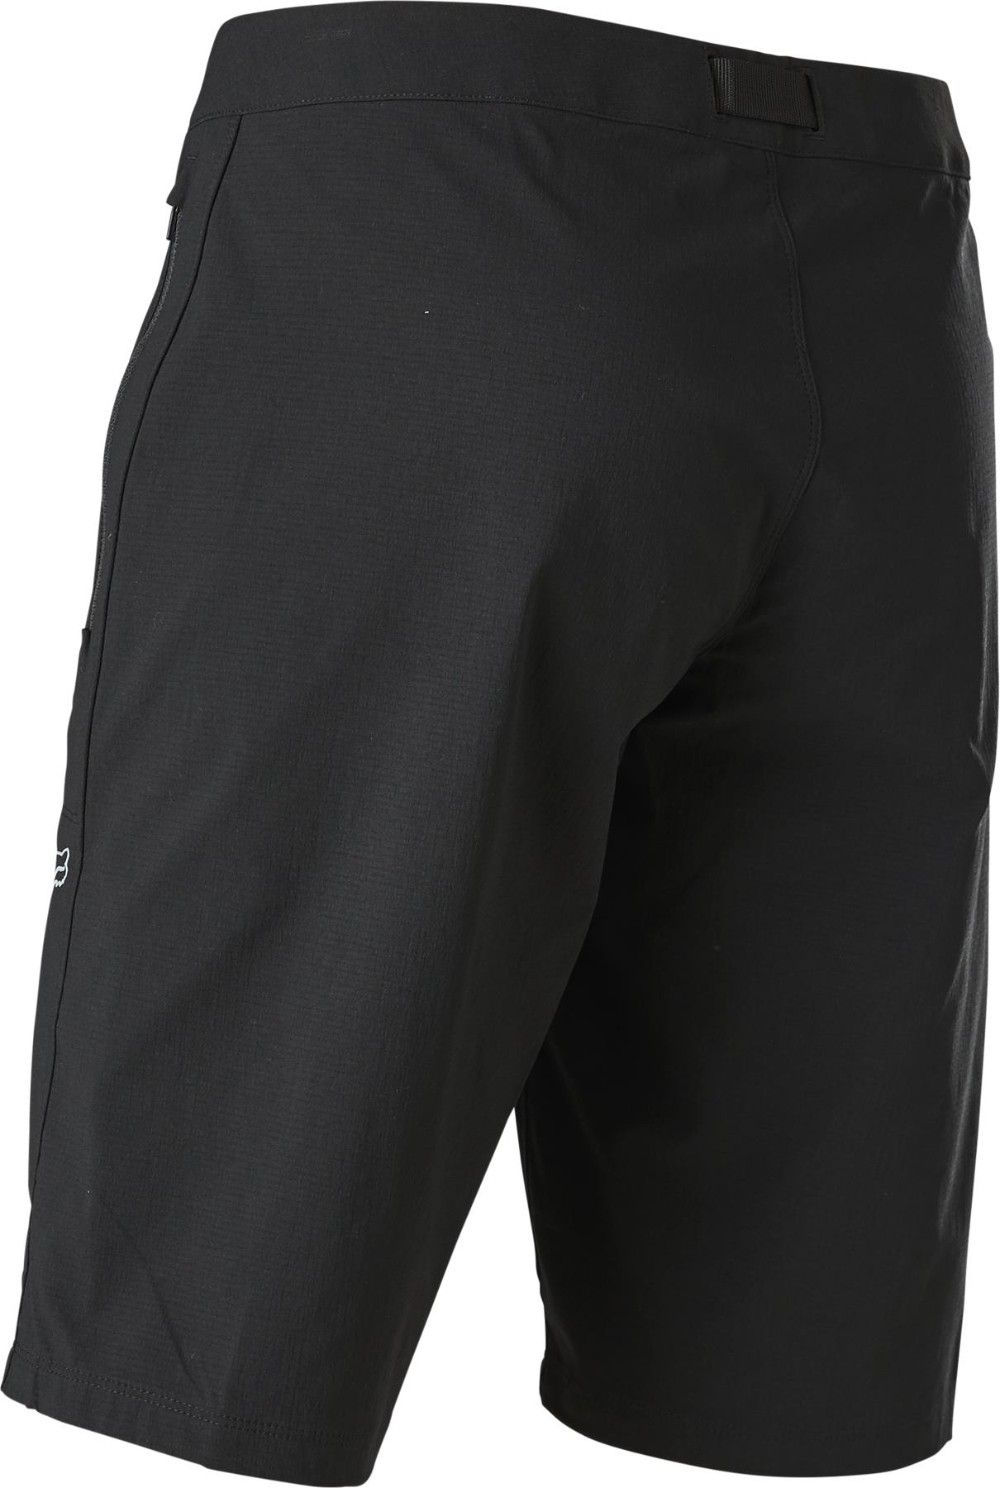 Ranger Womens Cycling Shorts with Liner image 1